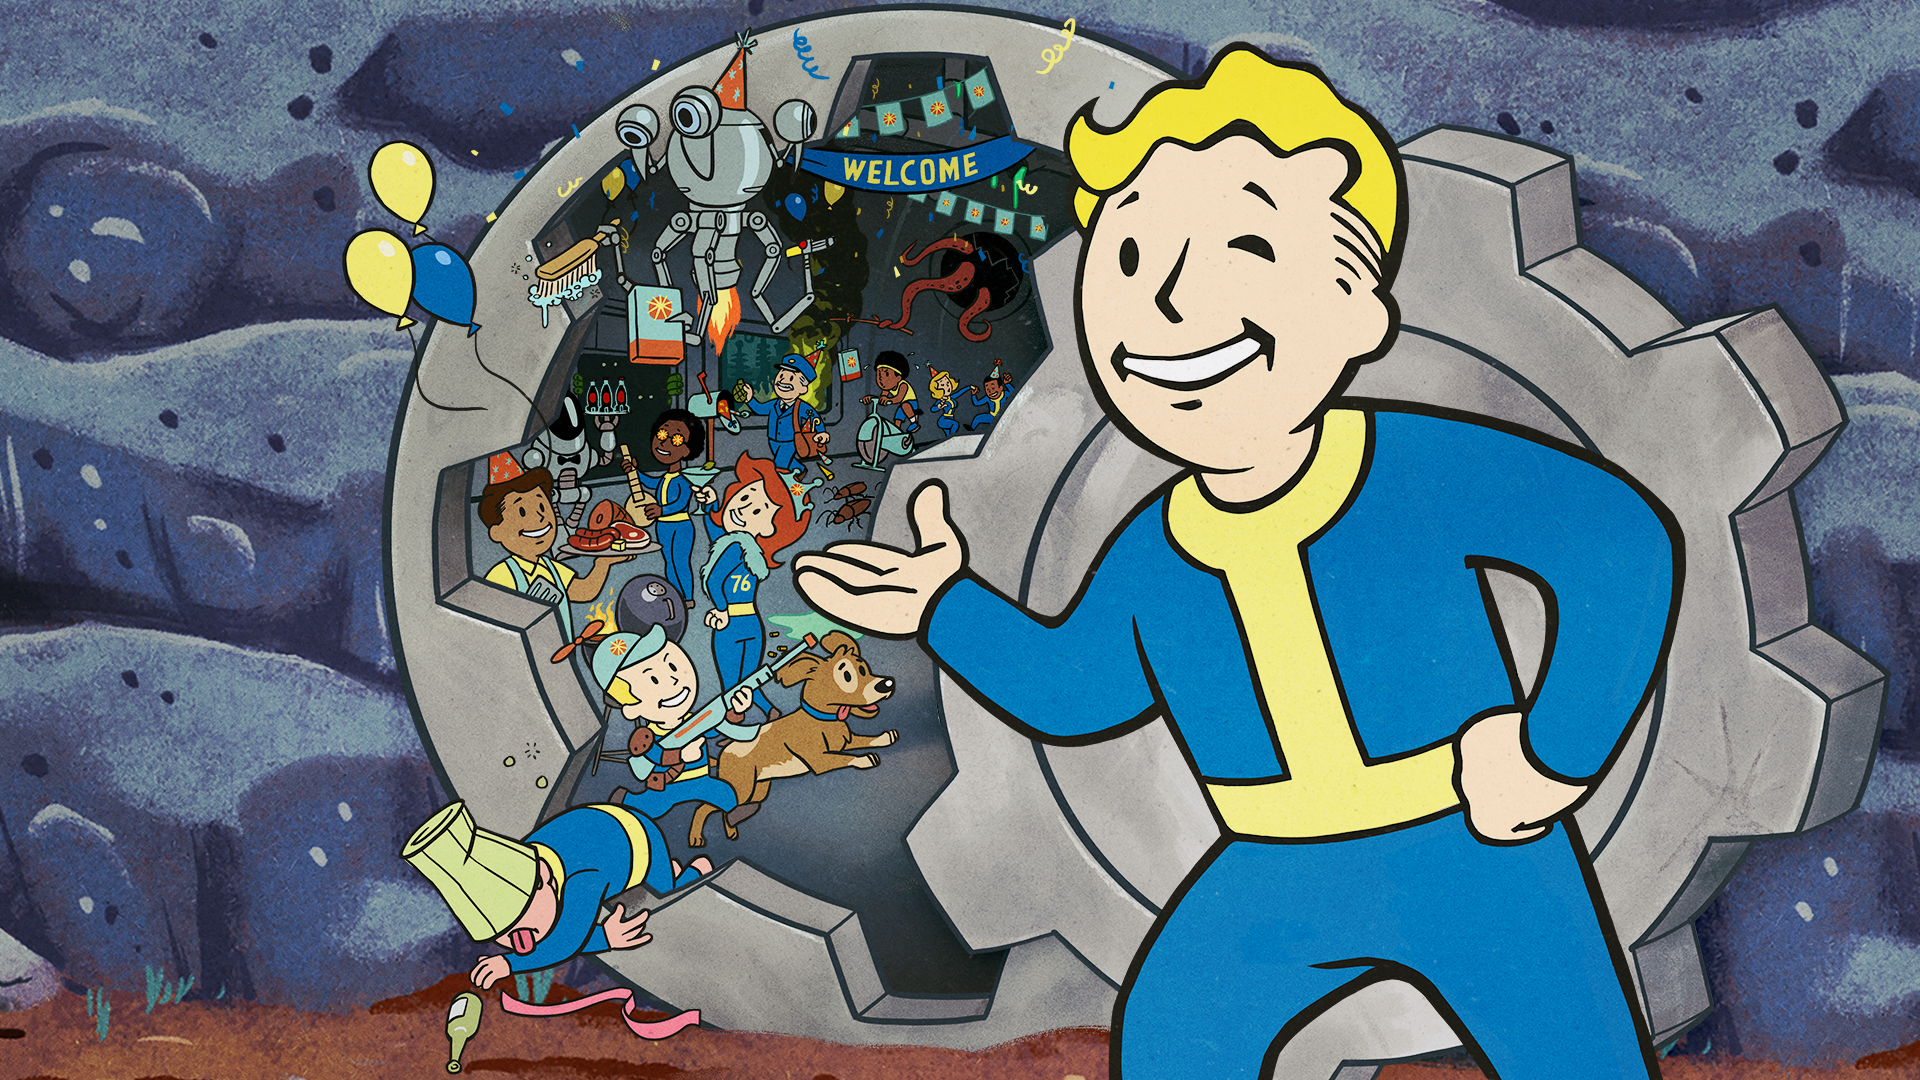 Bethesda fallout 76 on steam фото 83